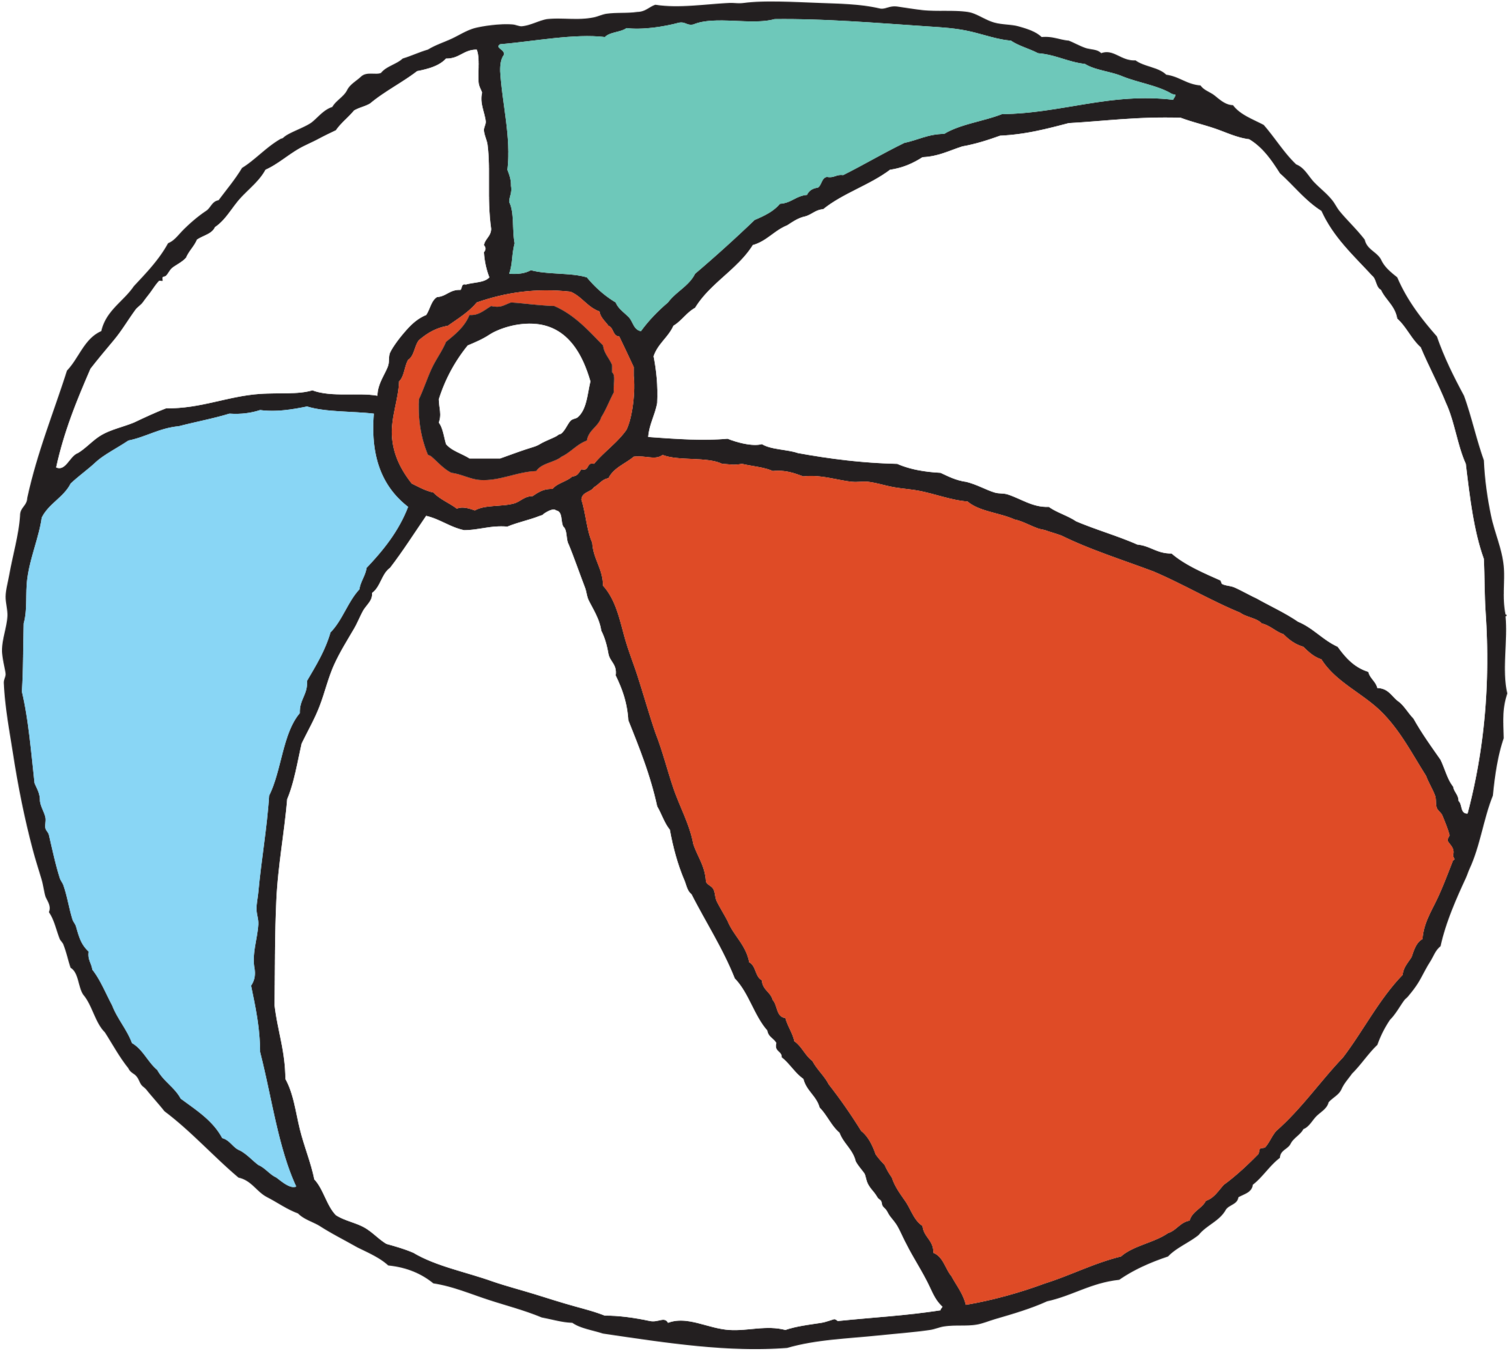 Download Beach Ball - Small Beach Ball Cartoon PNG Image with No Background  